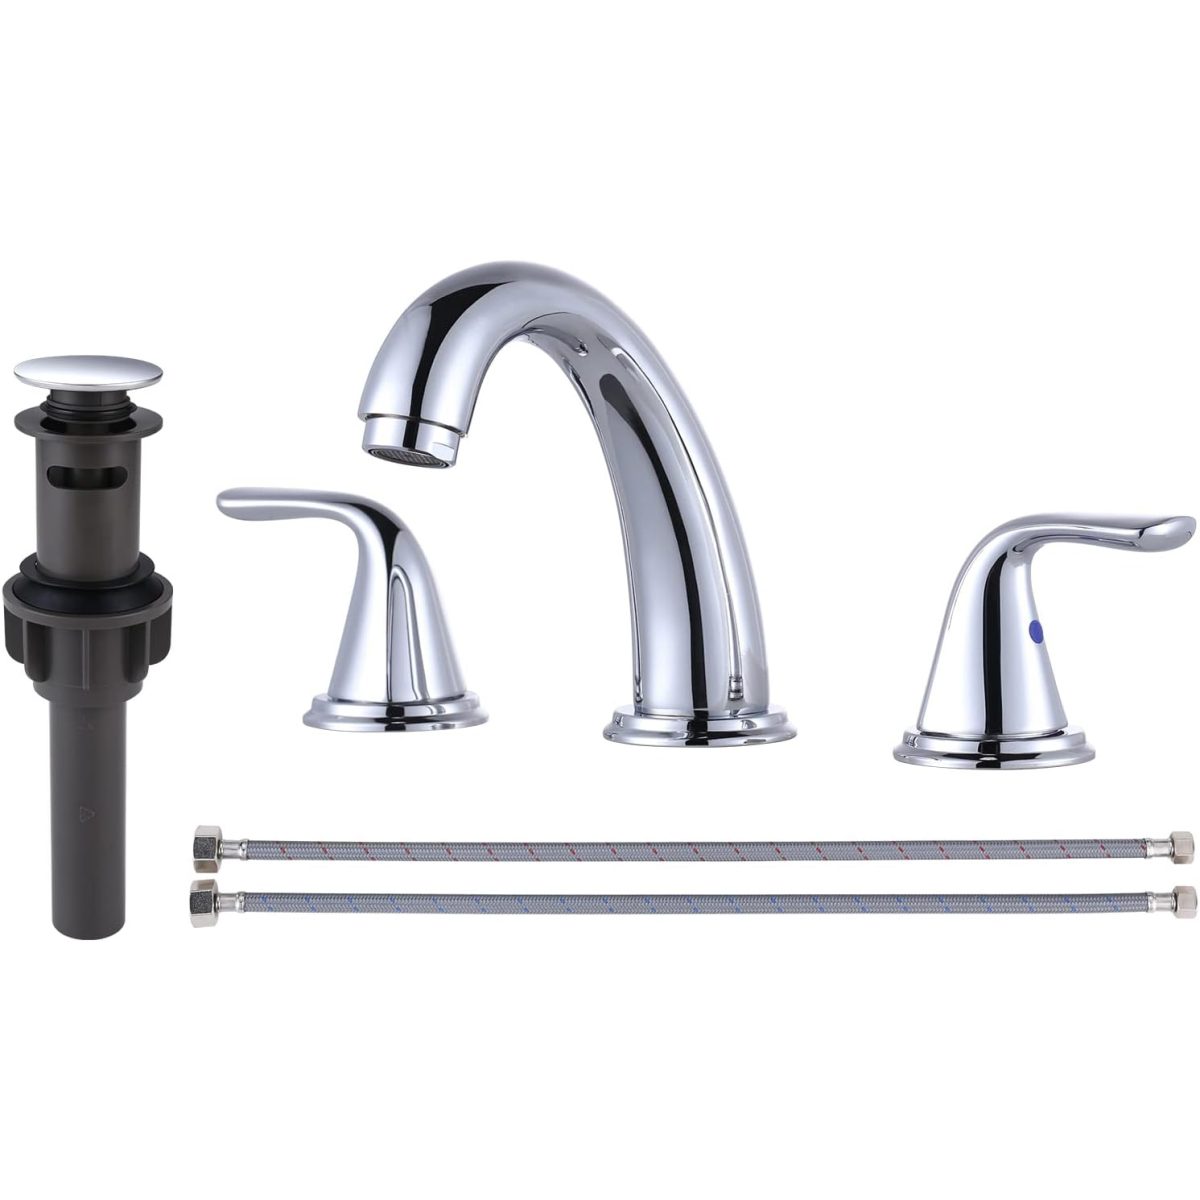 About this item 【High Quality】This widespread bathroom faucet is finished by matte black which has a good performance of anti scratch and rustproof for daily use . The faucet inside has a ceramic valve which can provide a leak free capability . 【Elegant Design】Widespread design can be installed in most of 3 holes deck.The red and blue dots on each handle are distinguished for cold and hot water controls .The faucet also come with a pop up drain as a set 【Quick Installation】For easy installation, we redesign the structure of faucet ,so the clients can install this faucet with just simple steps .Plus , we have all accessories and a well explained guide in the box. 【Premium Material】The faucet is made of zinc and the o ring is brass made . Compared with others materials ,zinc has a better performance of anti scratch . 【Customer Service】30 days free return and 5-years warranty are offered. If you have any questions, please feel free to contact us.